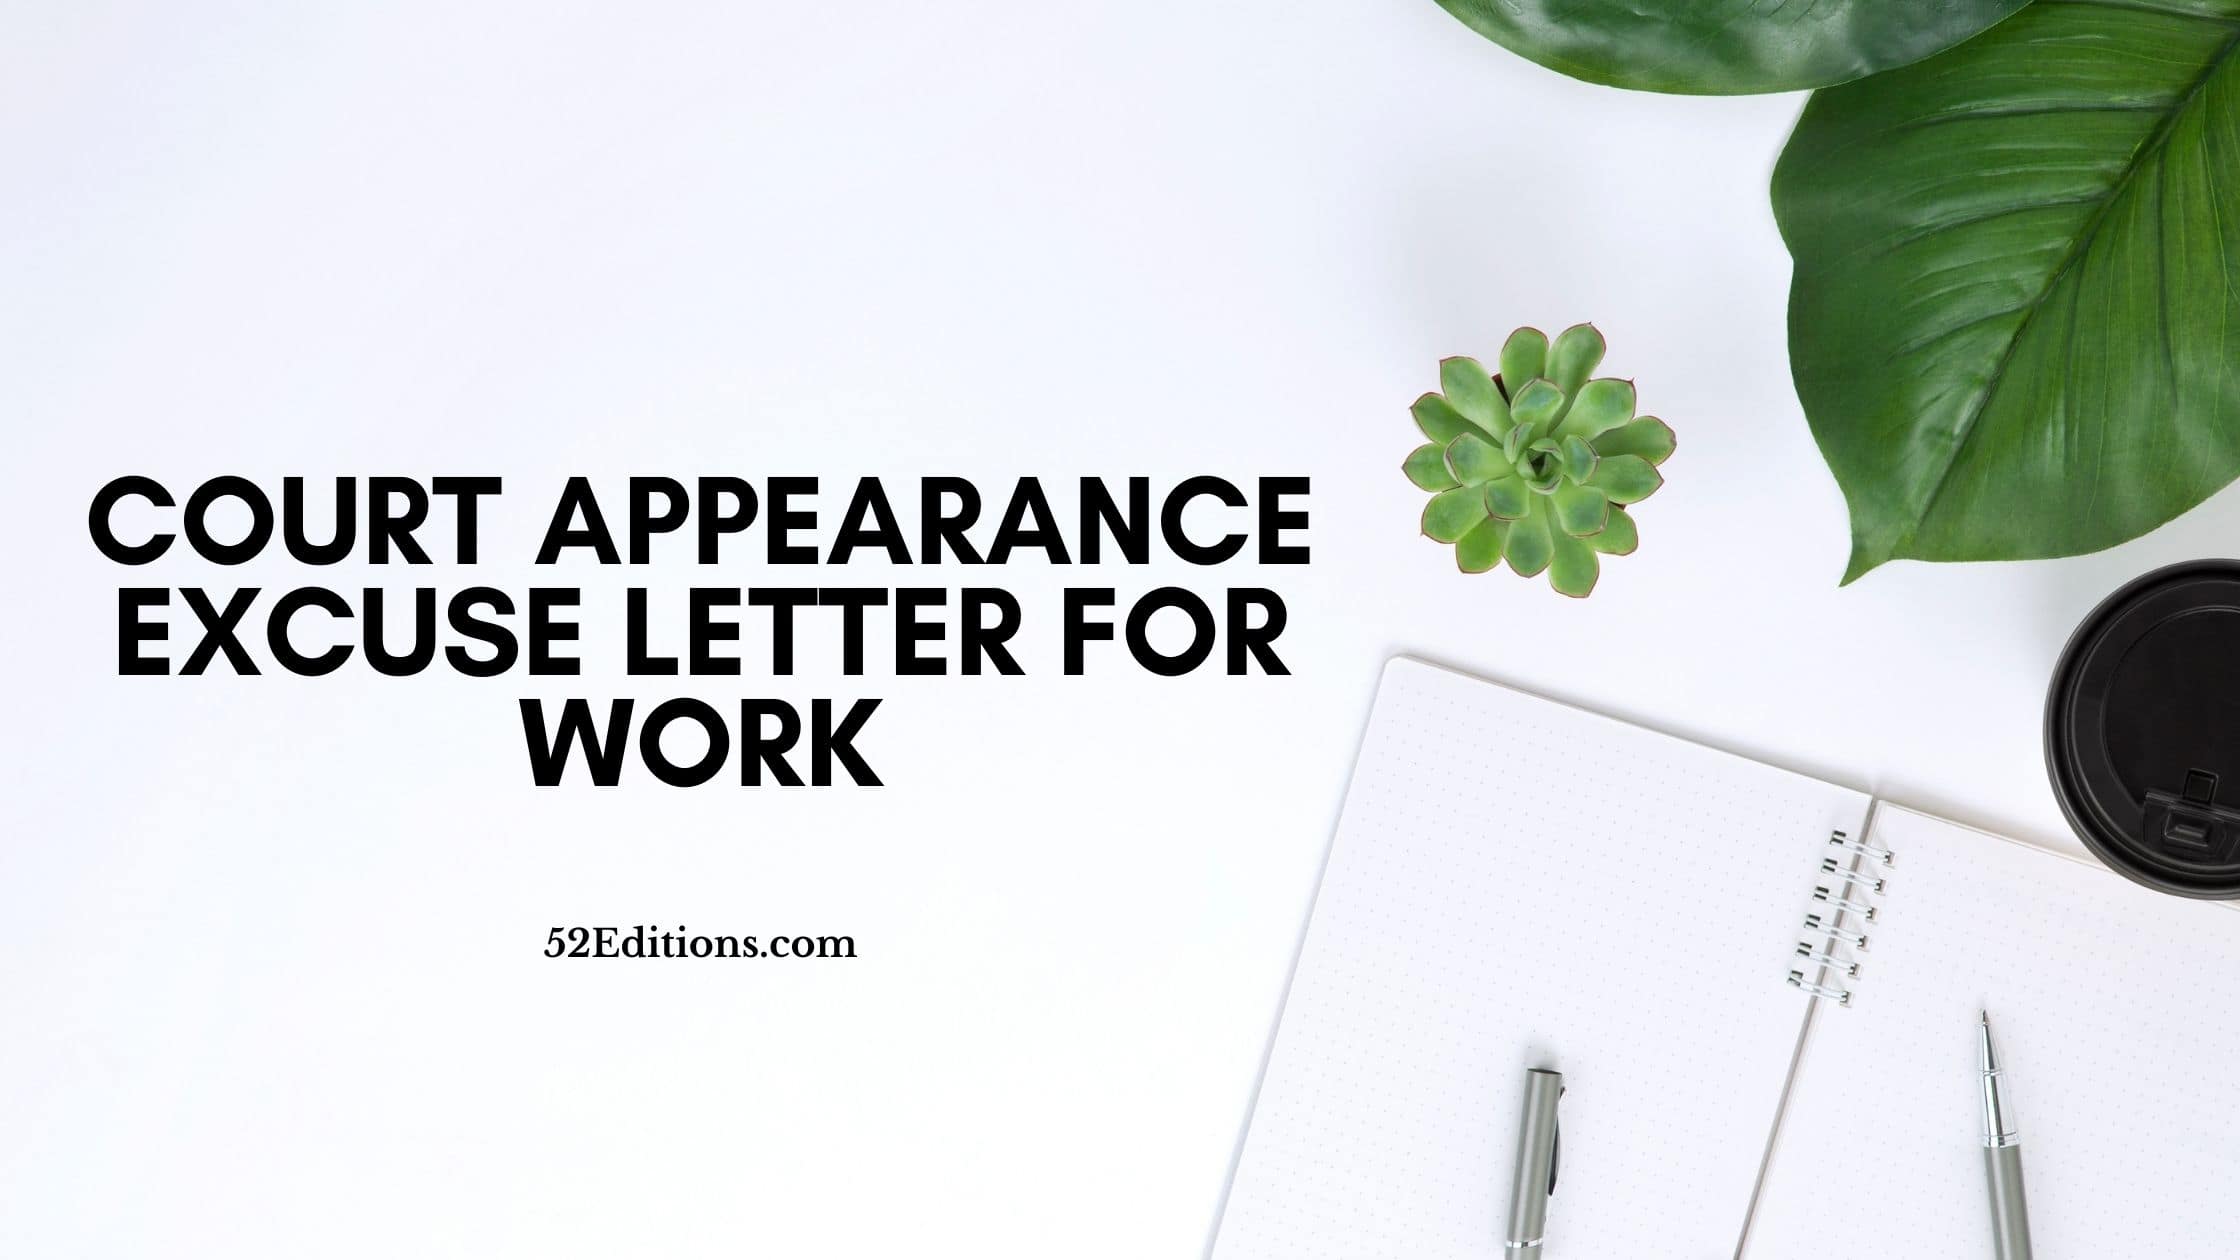 Court Appearance Excuse Letter For Work // Get FREE Letter Templates